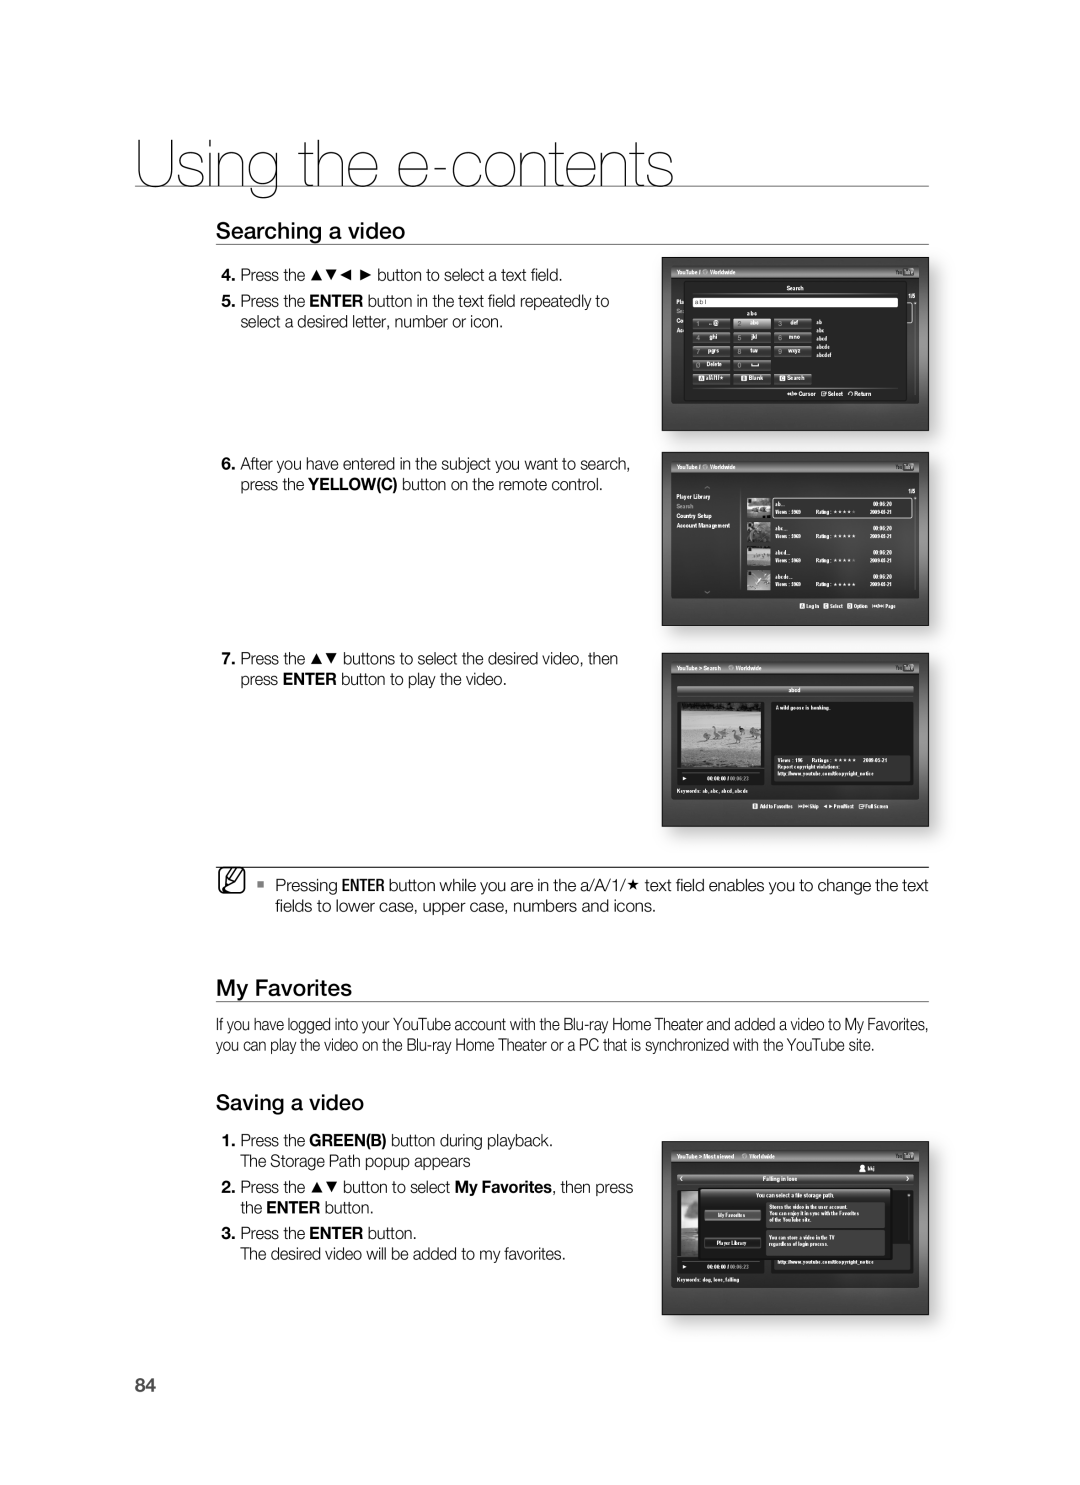 Samsung HT-BD1255, HT-BD1252 user manual My Favorites, Saving a video, Using the e-contents, Searching a video 